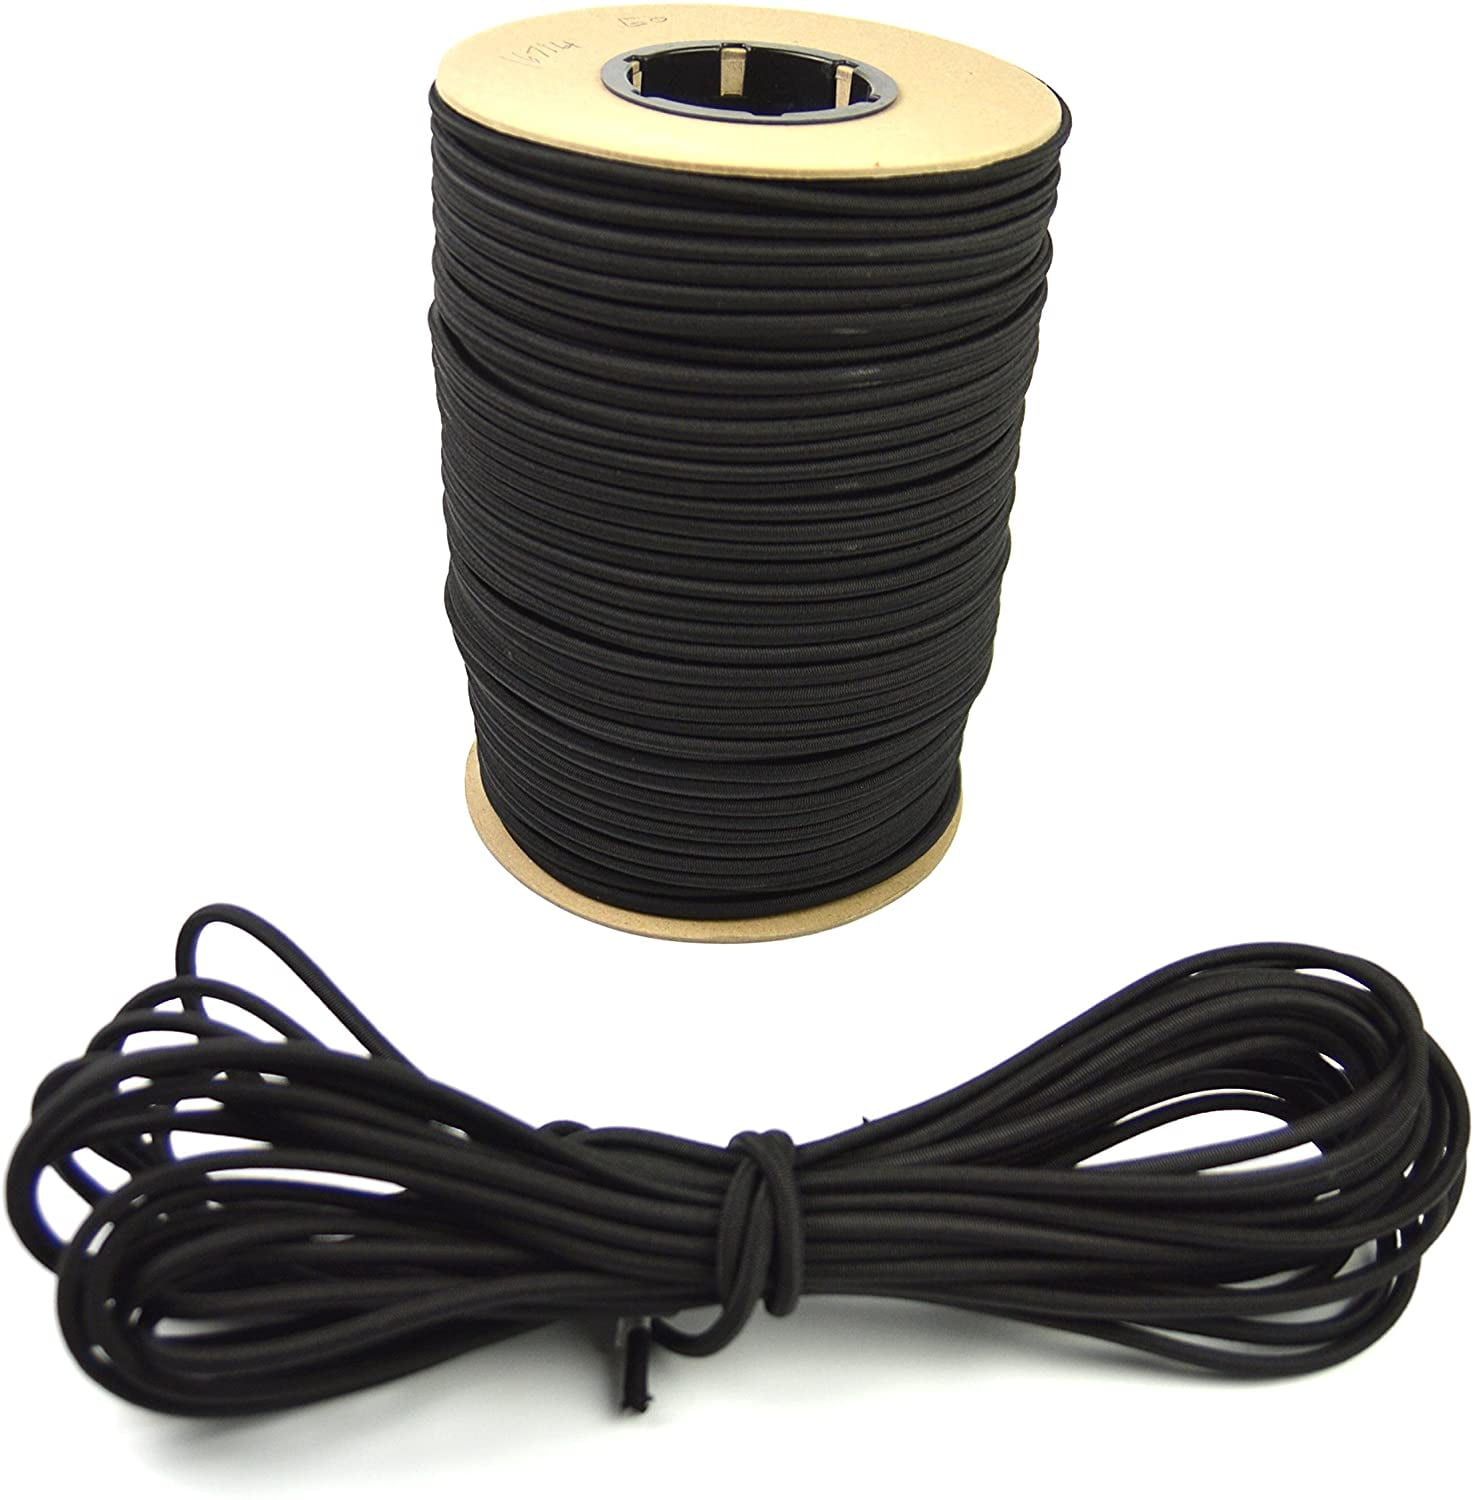 Bungie Nylon coated rubber rope shock cord 3/16" x 500' Bungee Stretch MadeN USA 